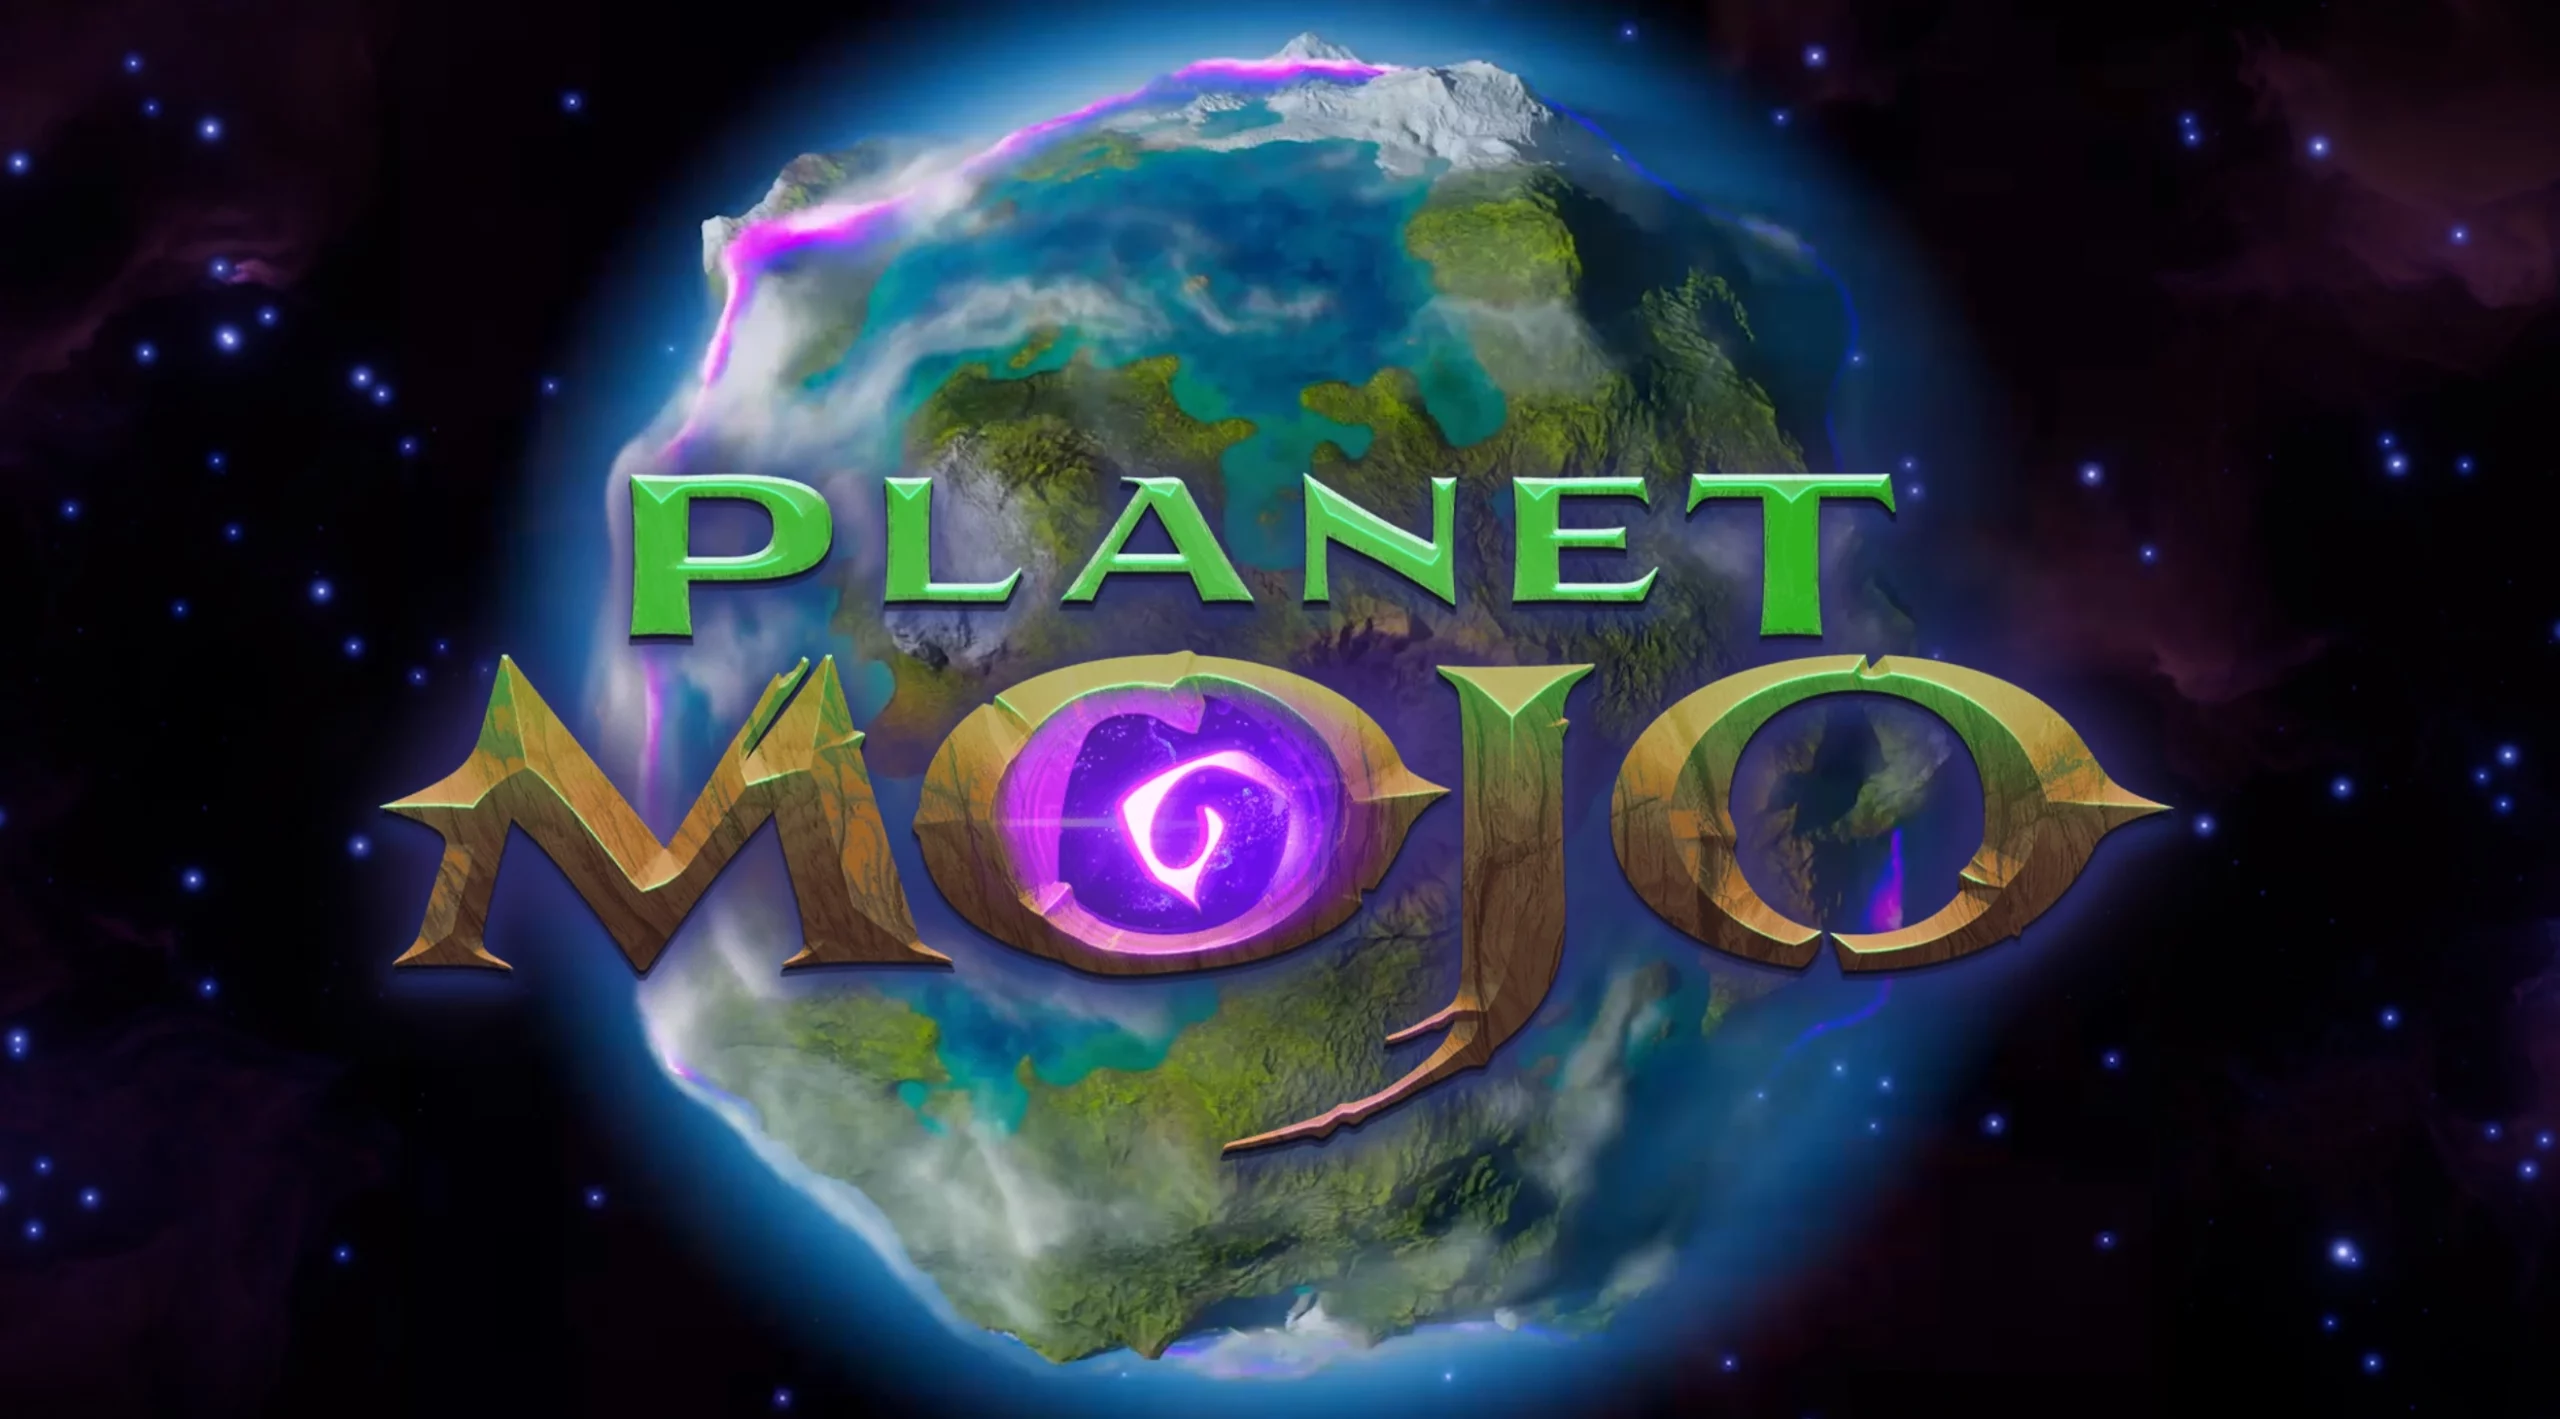 Planet Mojo Metaverse to Begin Private Playtests For NFT Holders